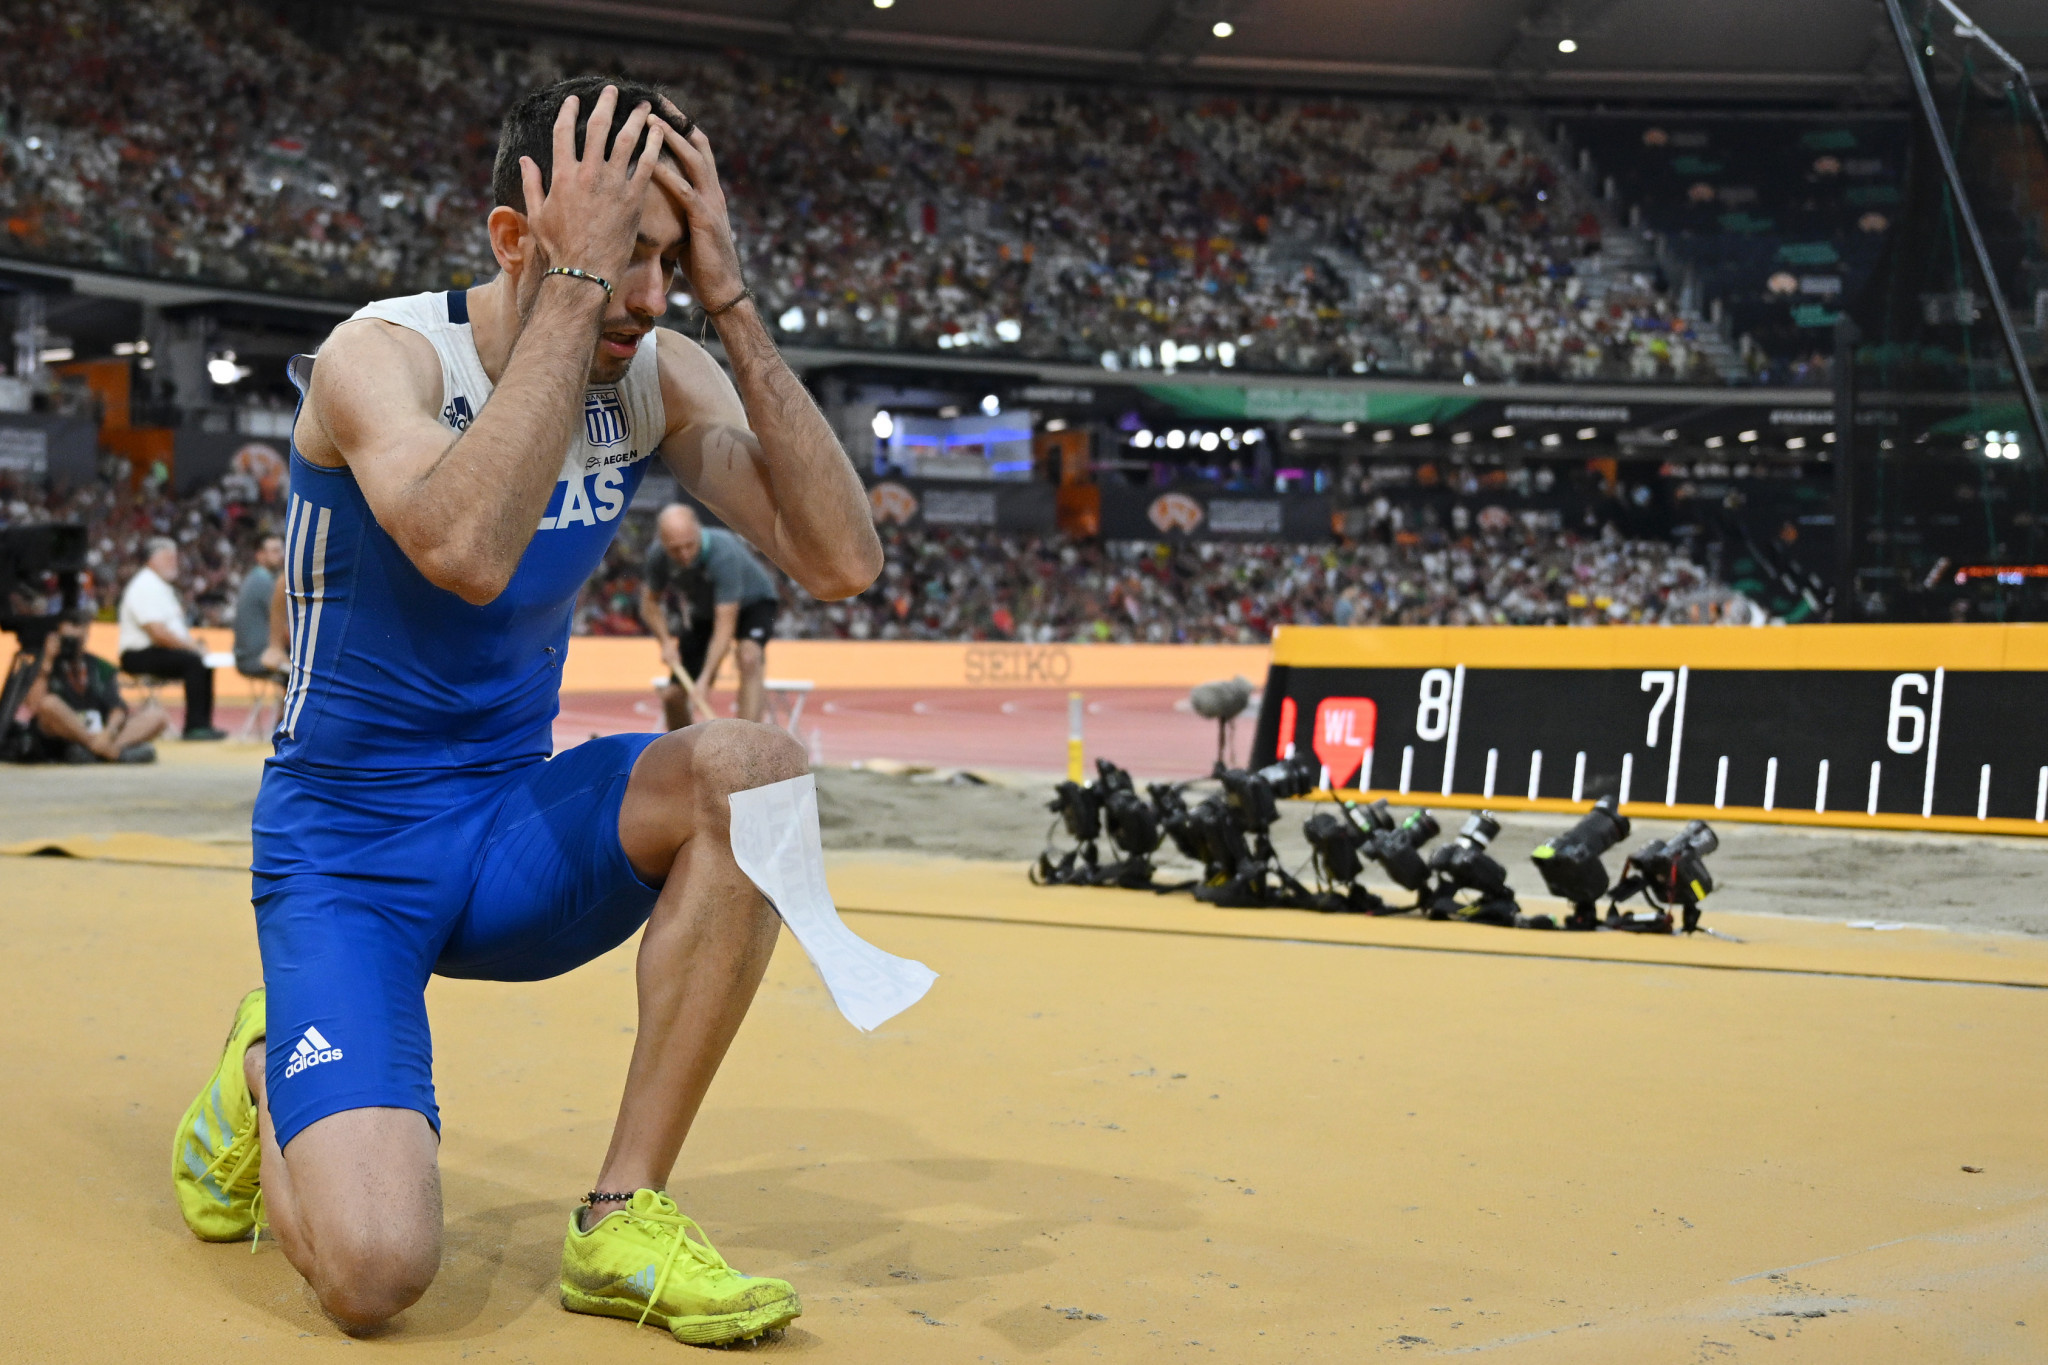 Olympic champion Miltiadis Tentoglou of Greece notched 8.52m on his last attempt in the men's high jump for a first gold at the World Championships, after silver last year ©Getty Images